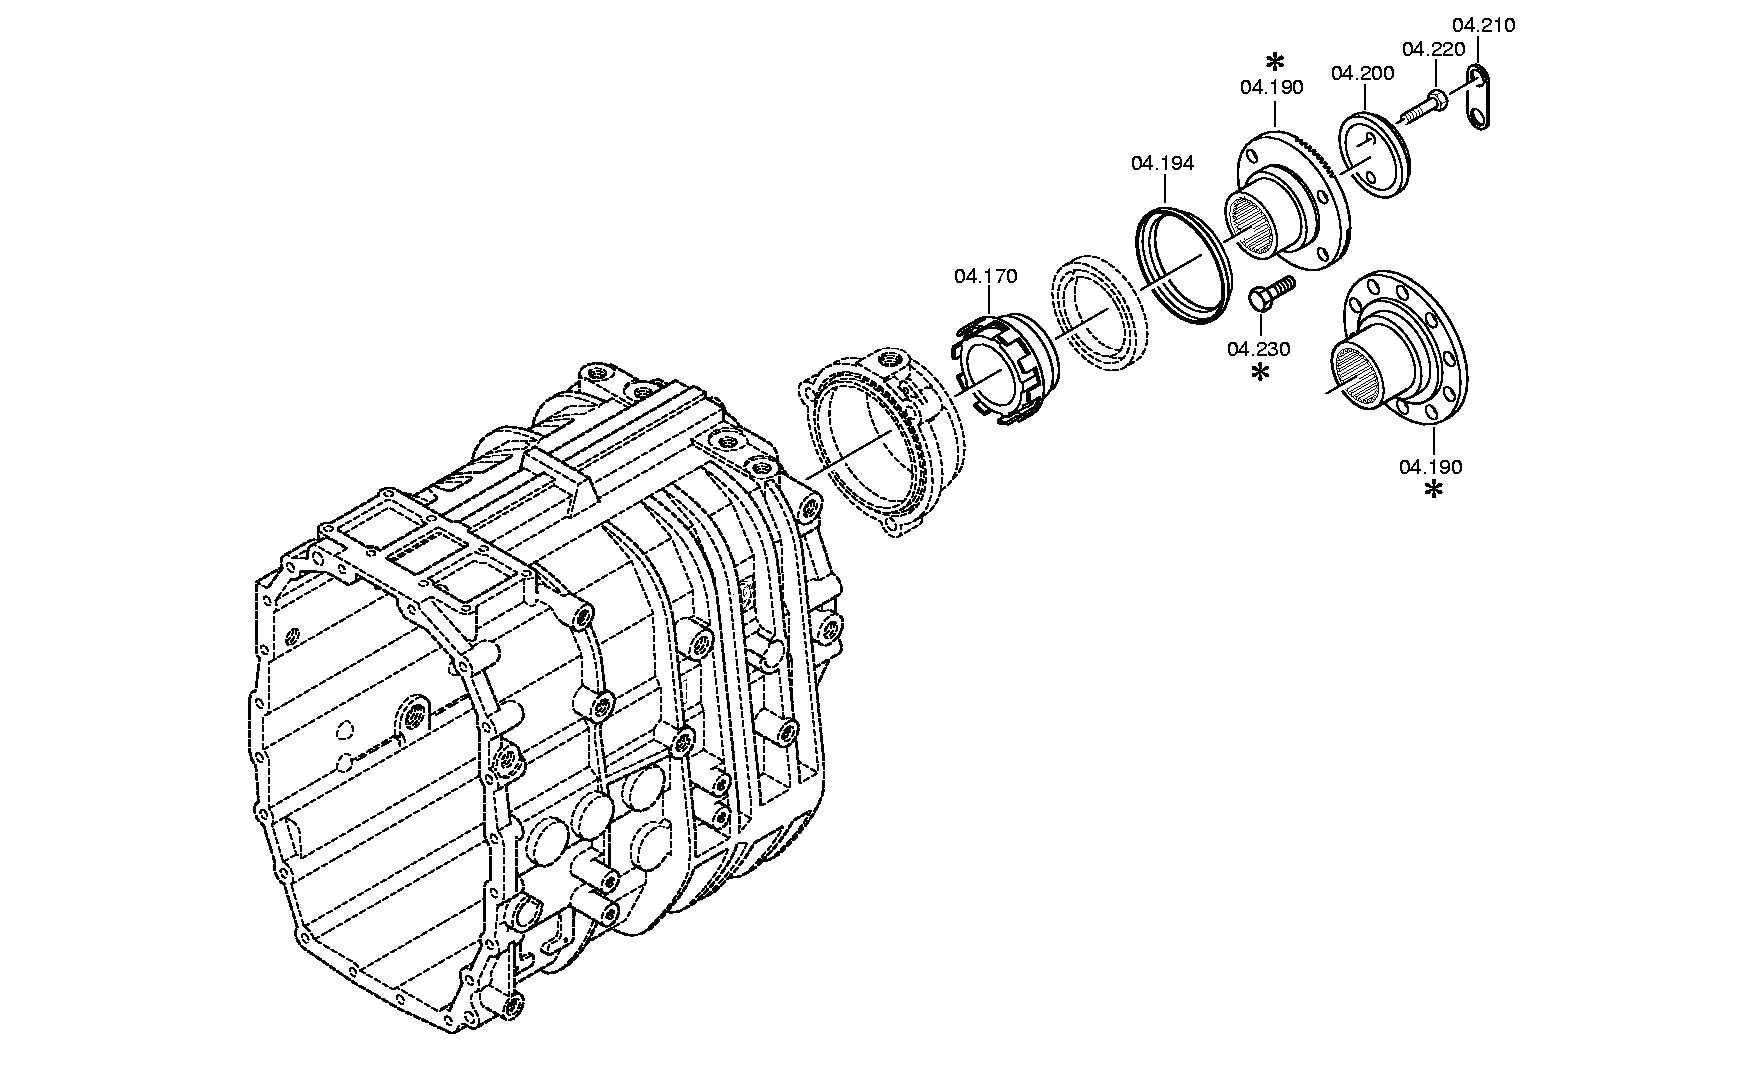 drawing for DAF 69774 - HEXAGON SCREW (figure 3)